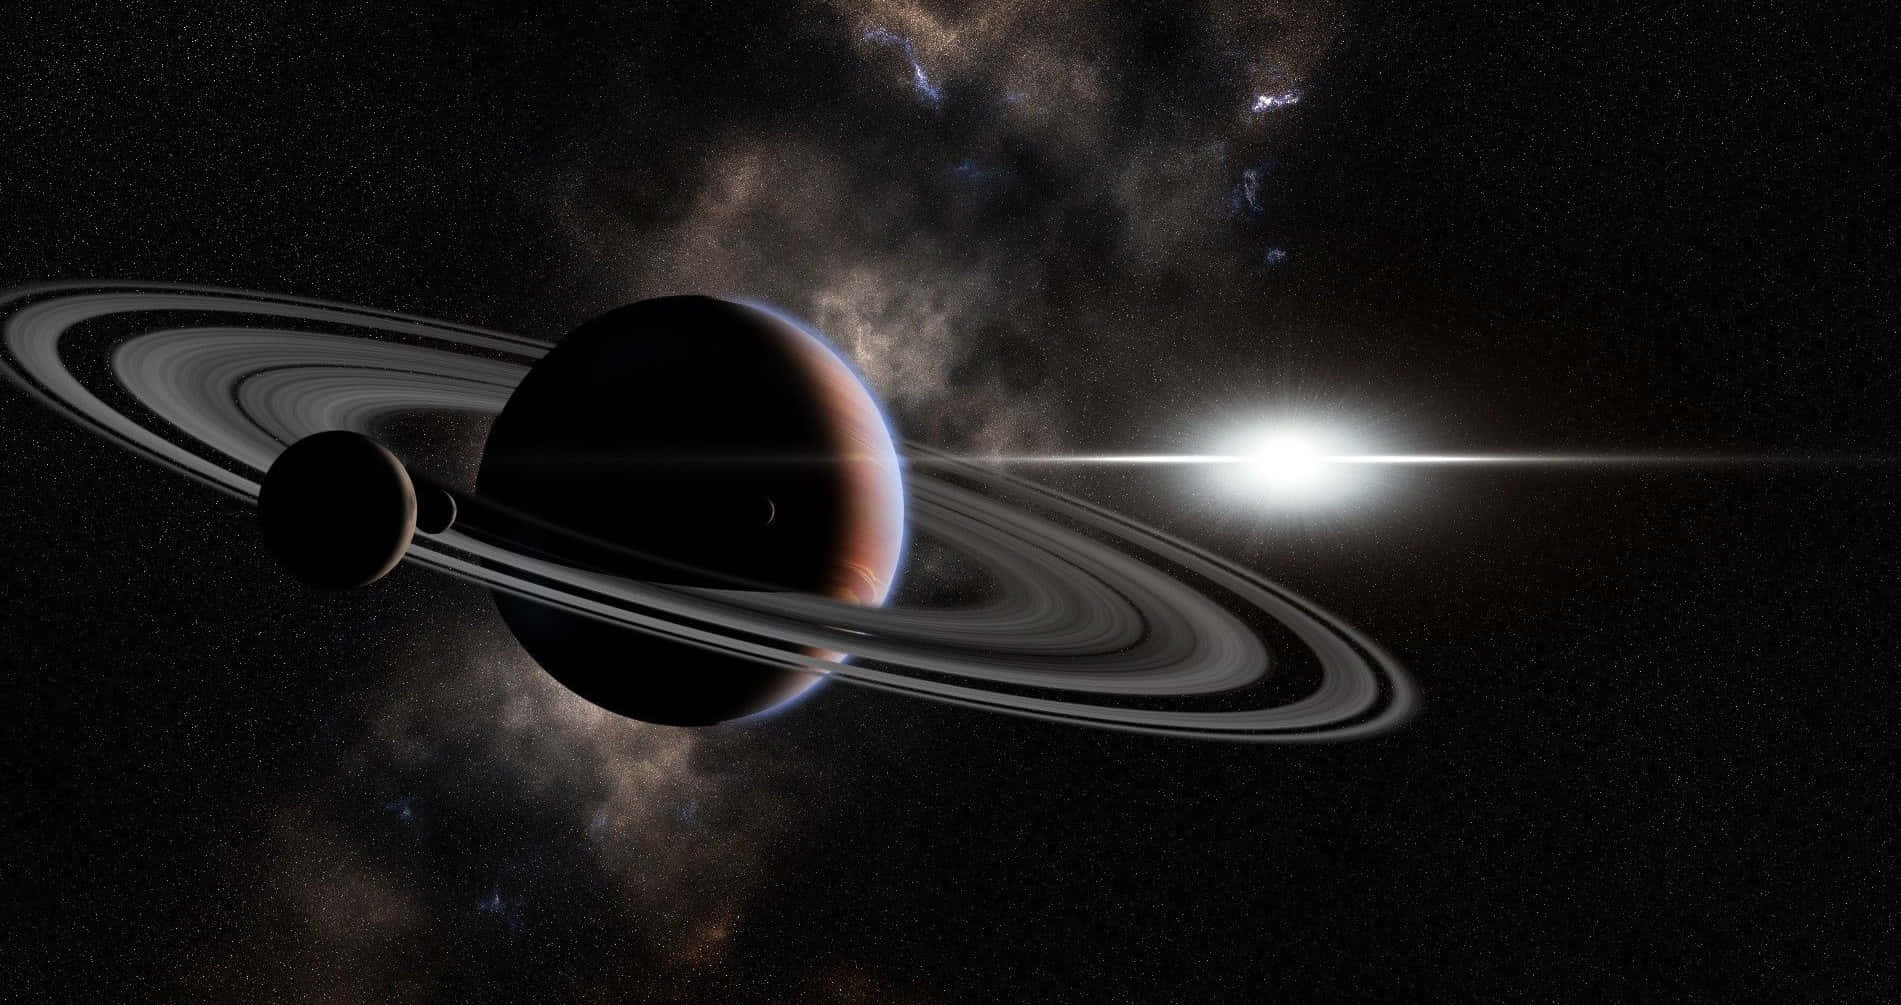 Stunning View of the Gas Giant, Saturn